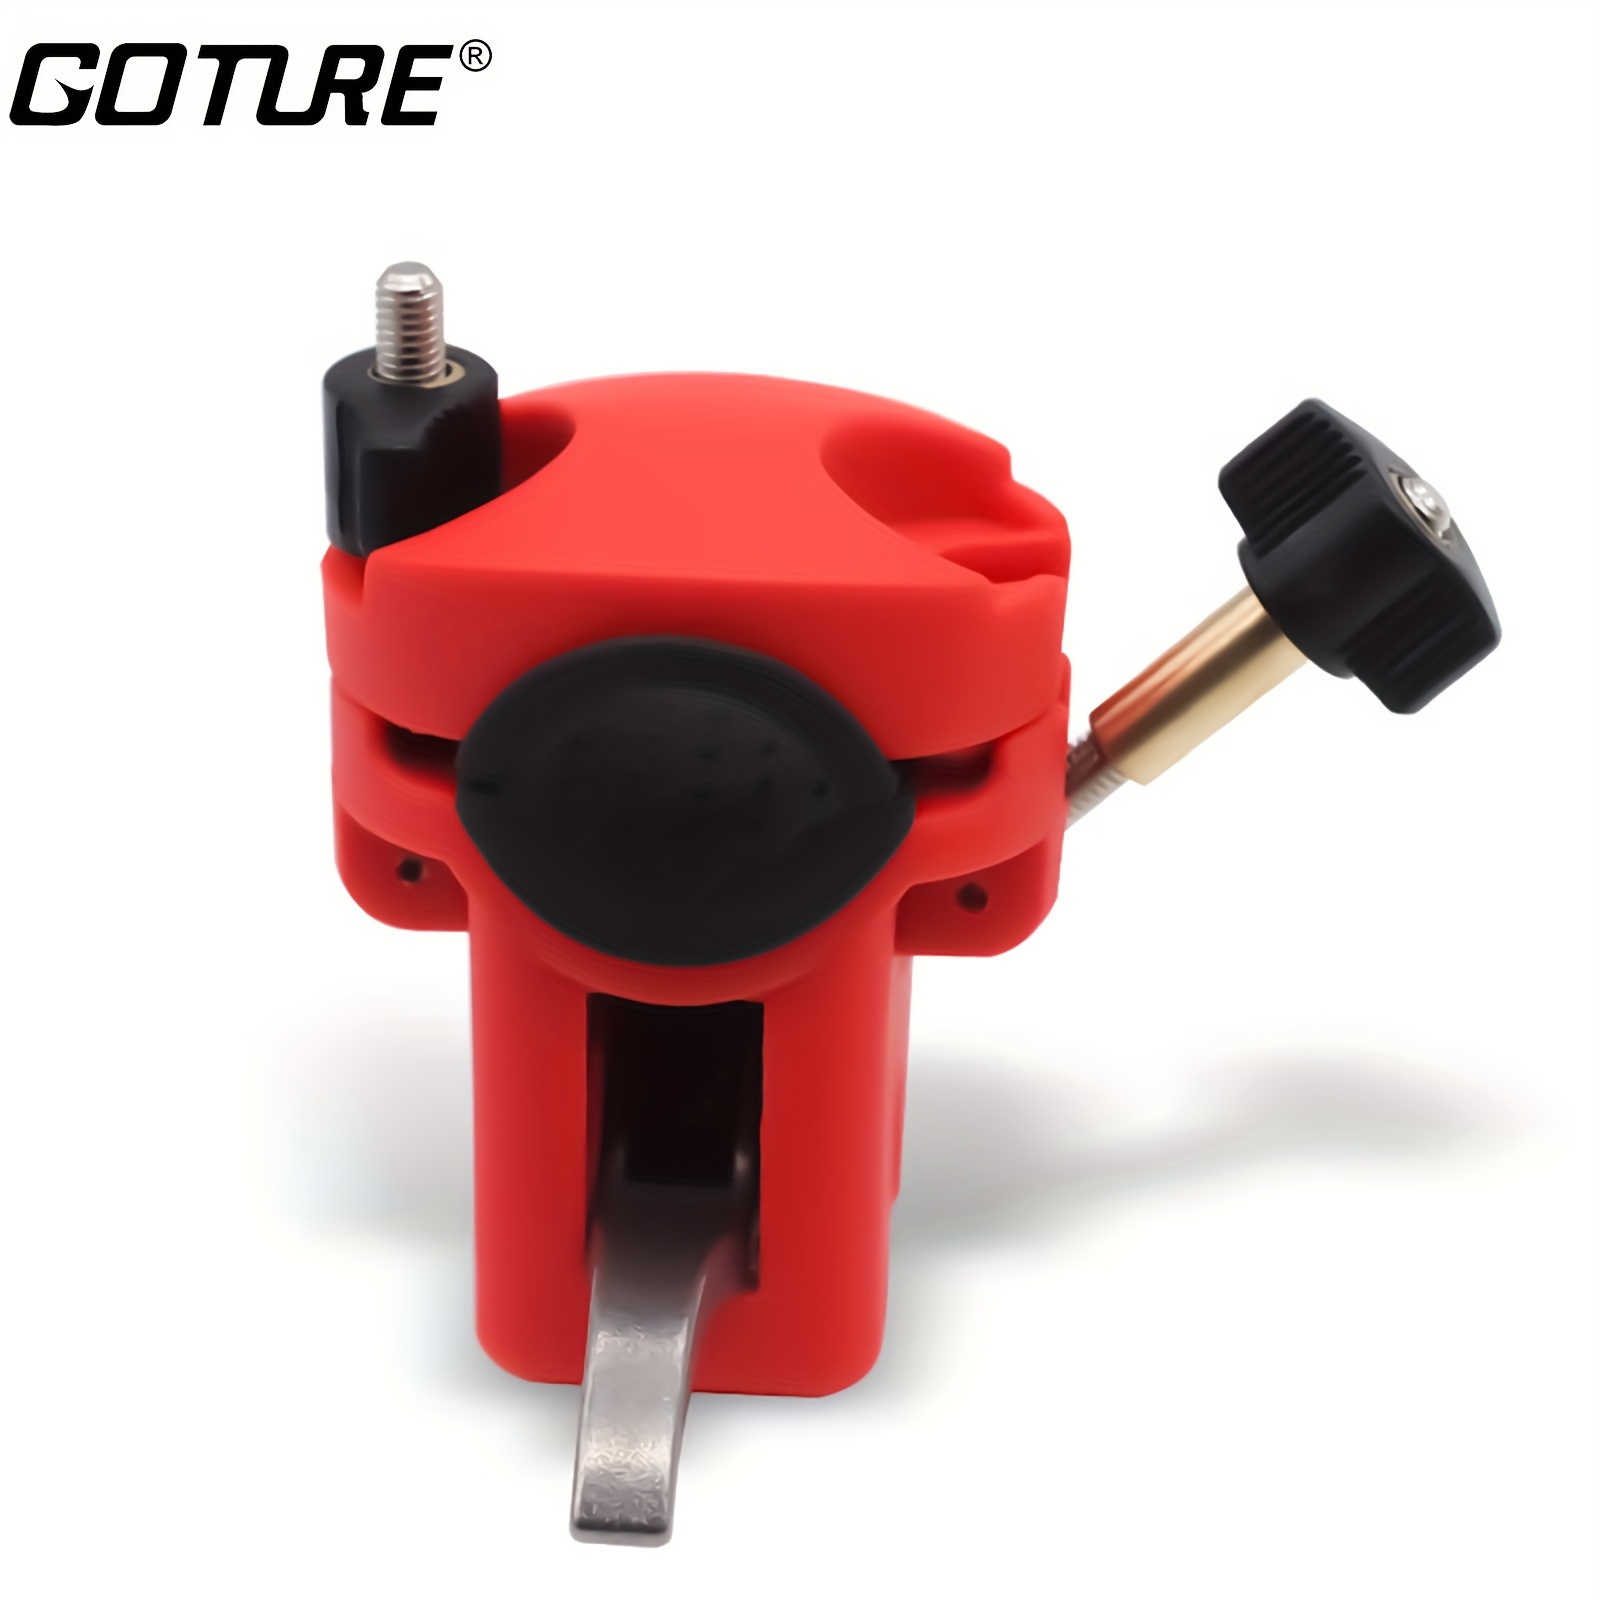 Goture 1PC Fishing Rod Holder Stainless Steel Mount Clamp Boat Fishing  Tackle 